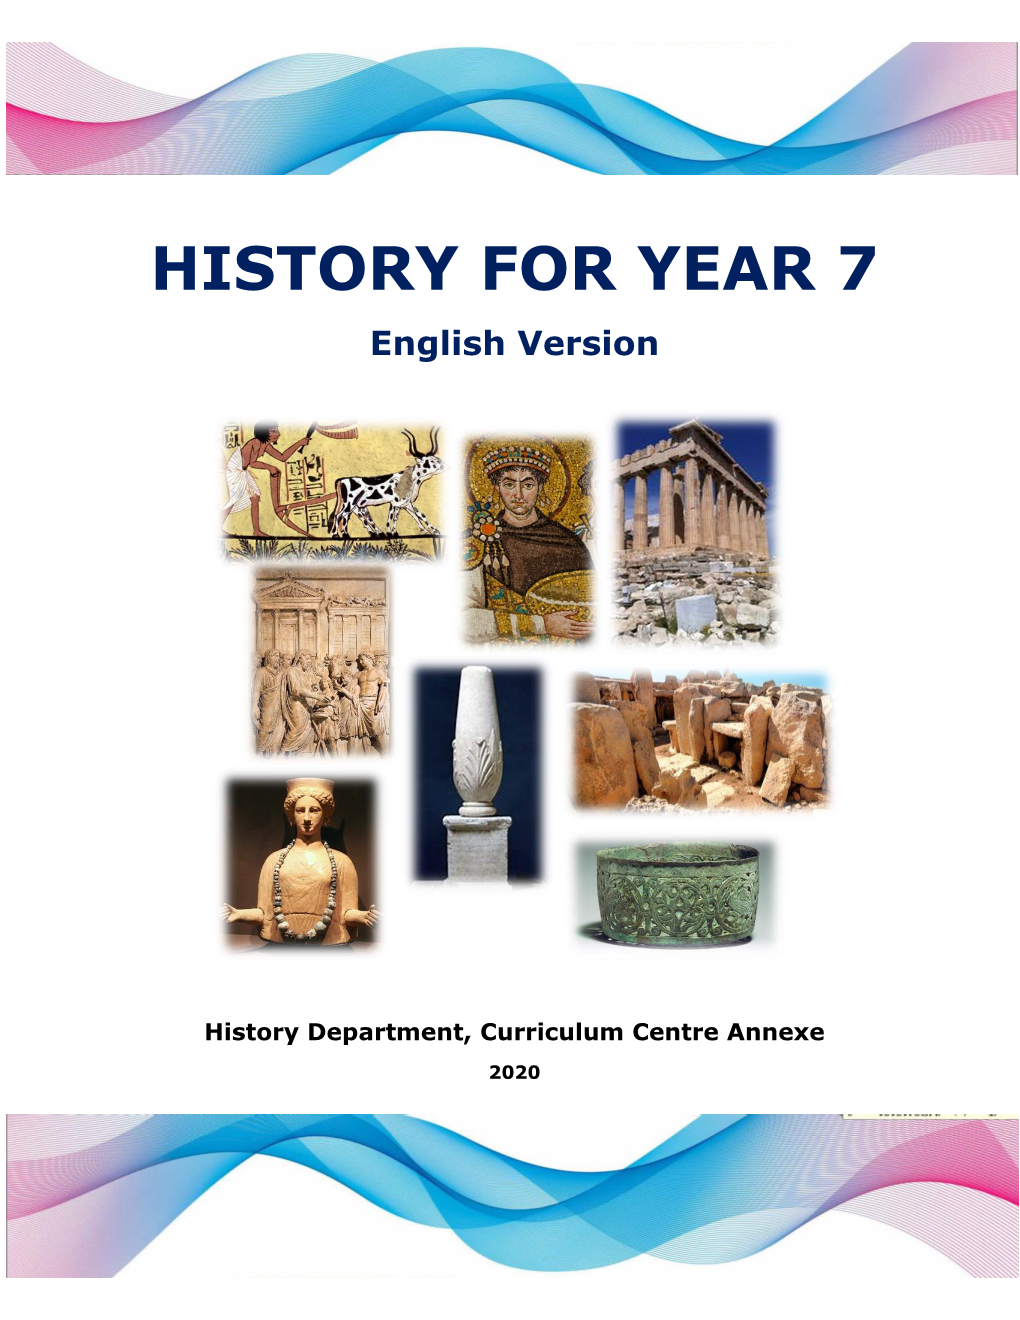 HISTORY for YEAR 7 English Version